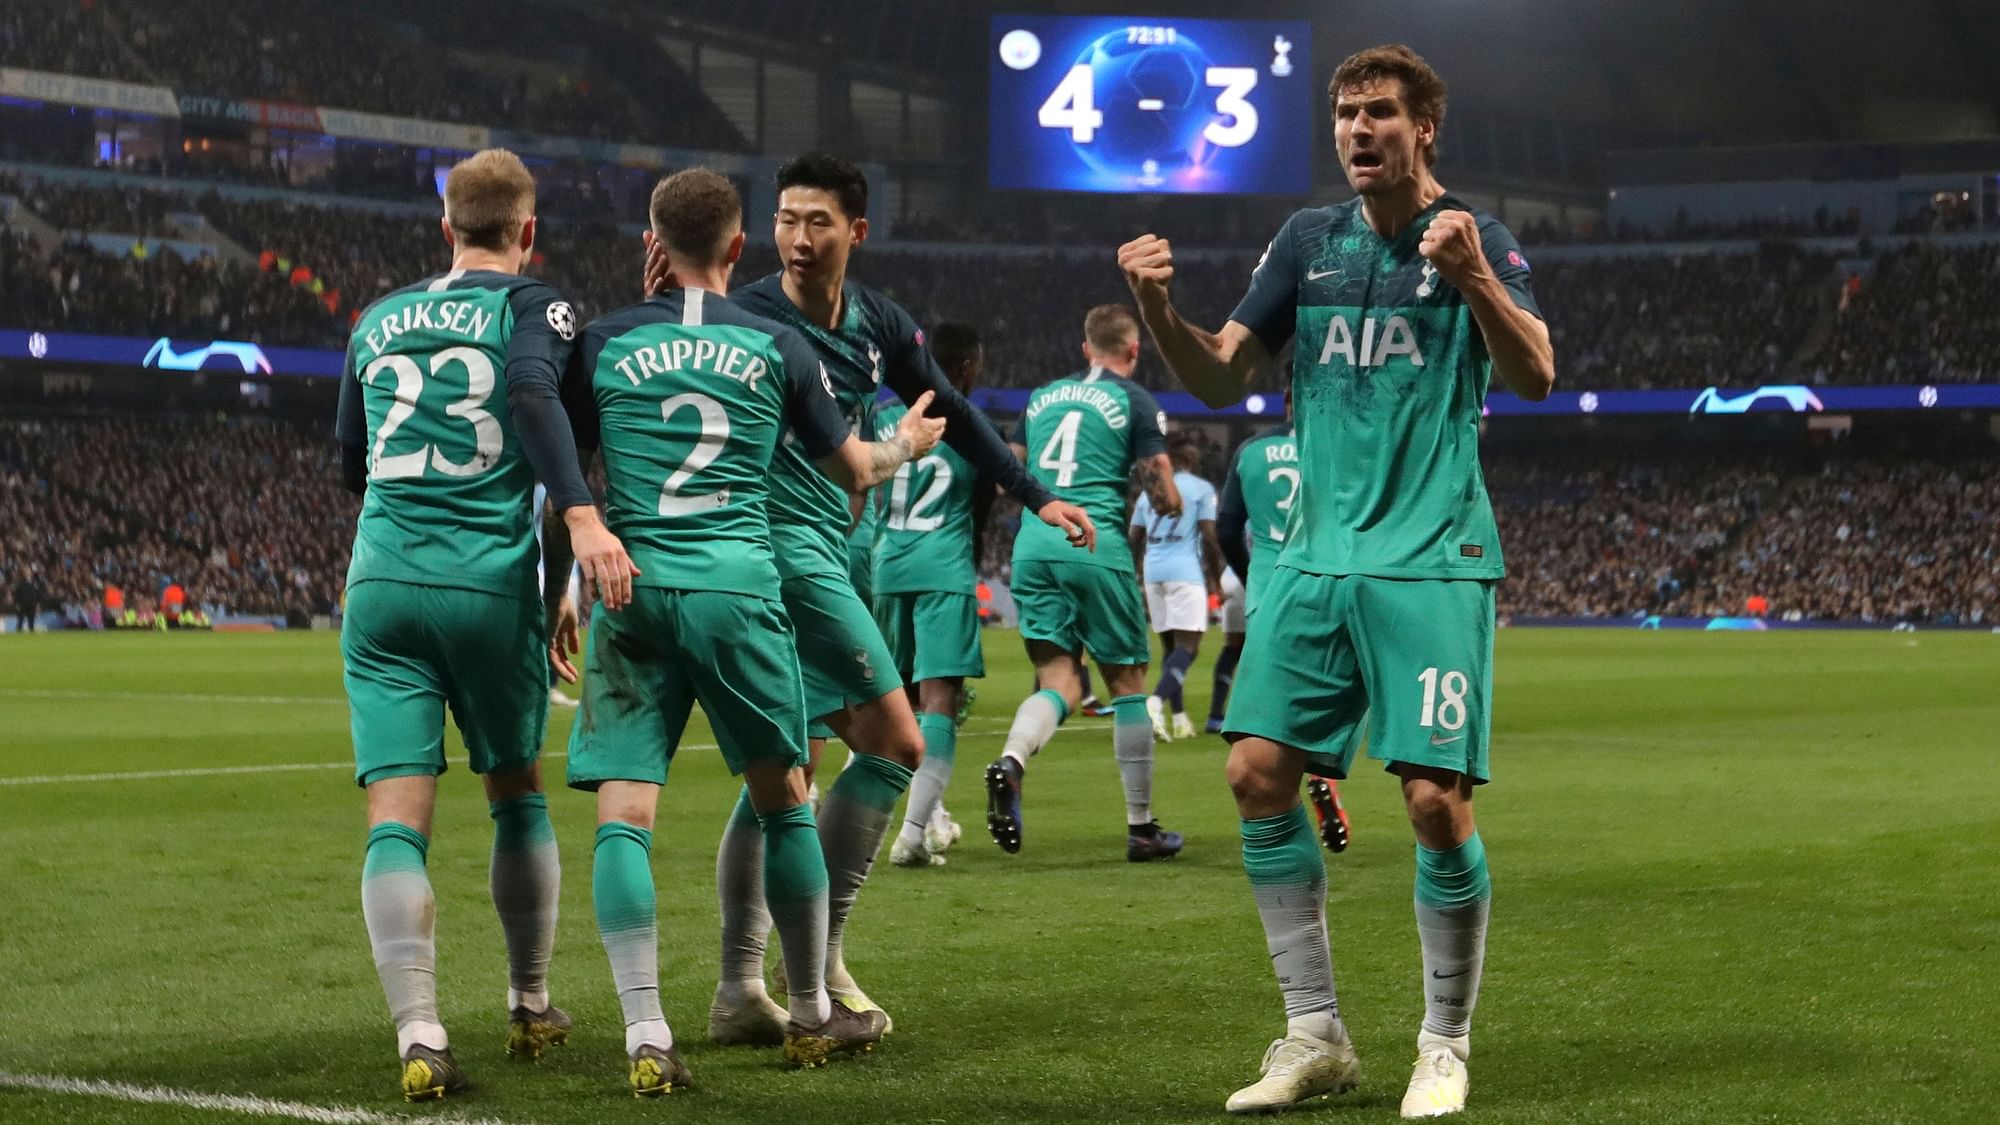 Tottenham Hotspur made it to the Champions League semi-finals after 57 years.